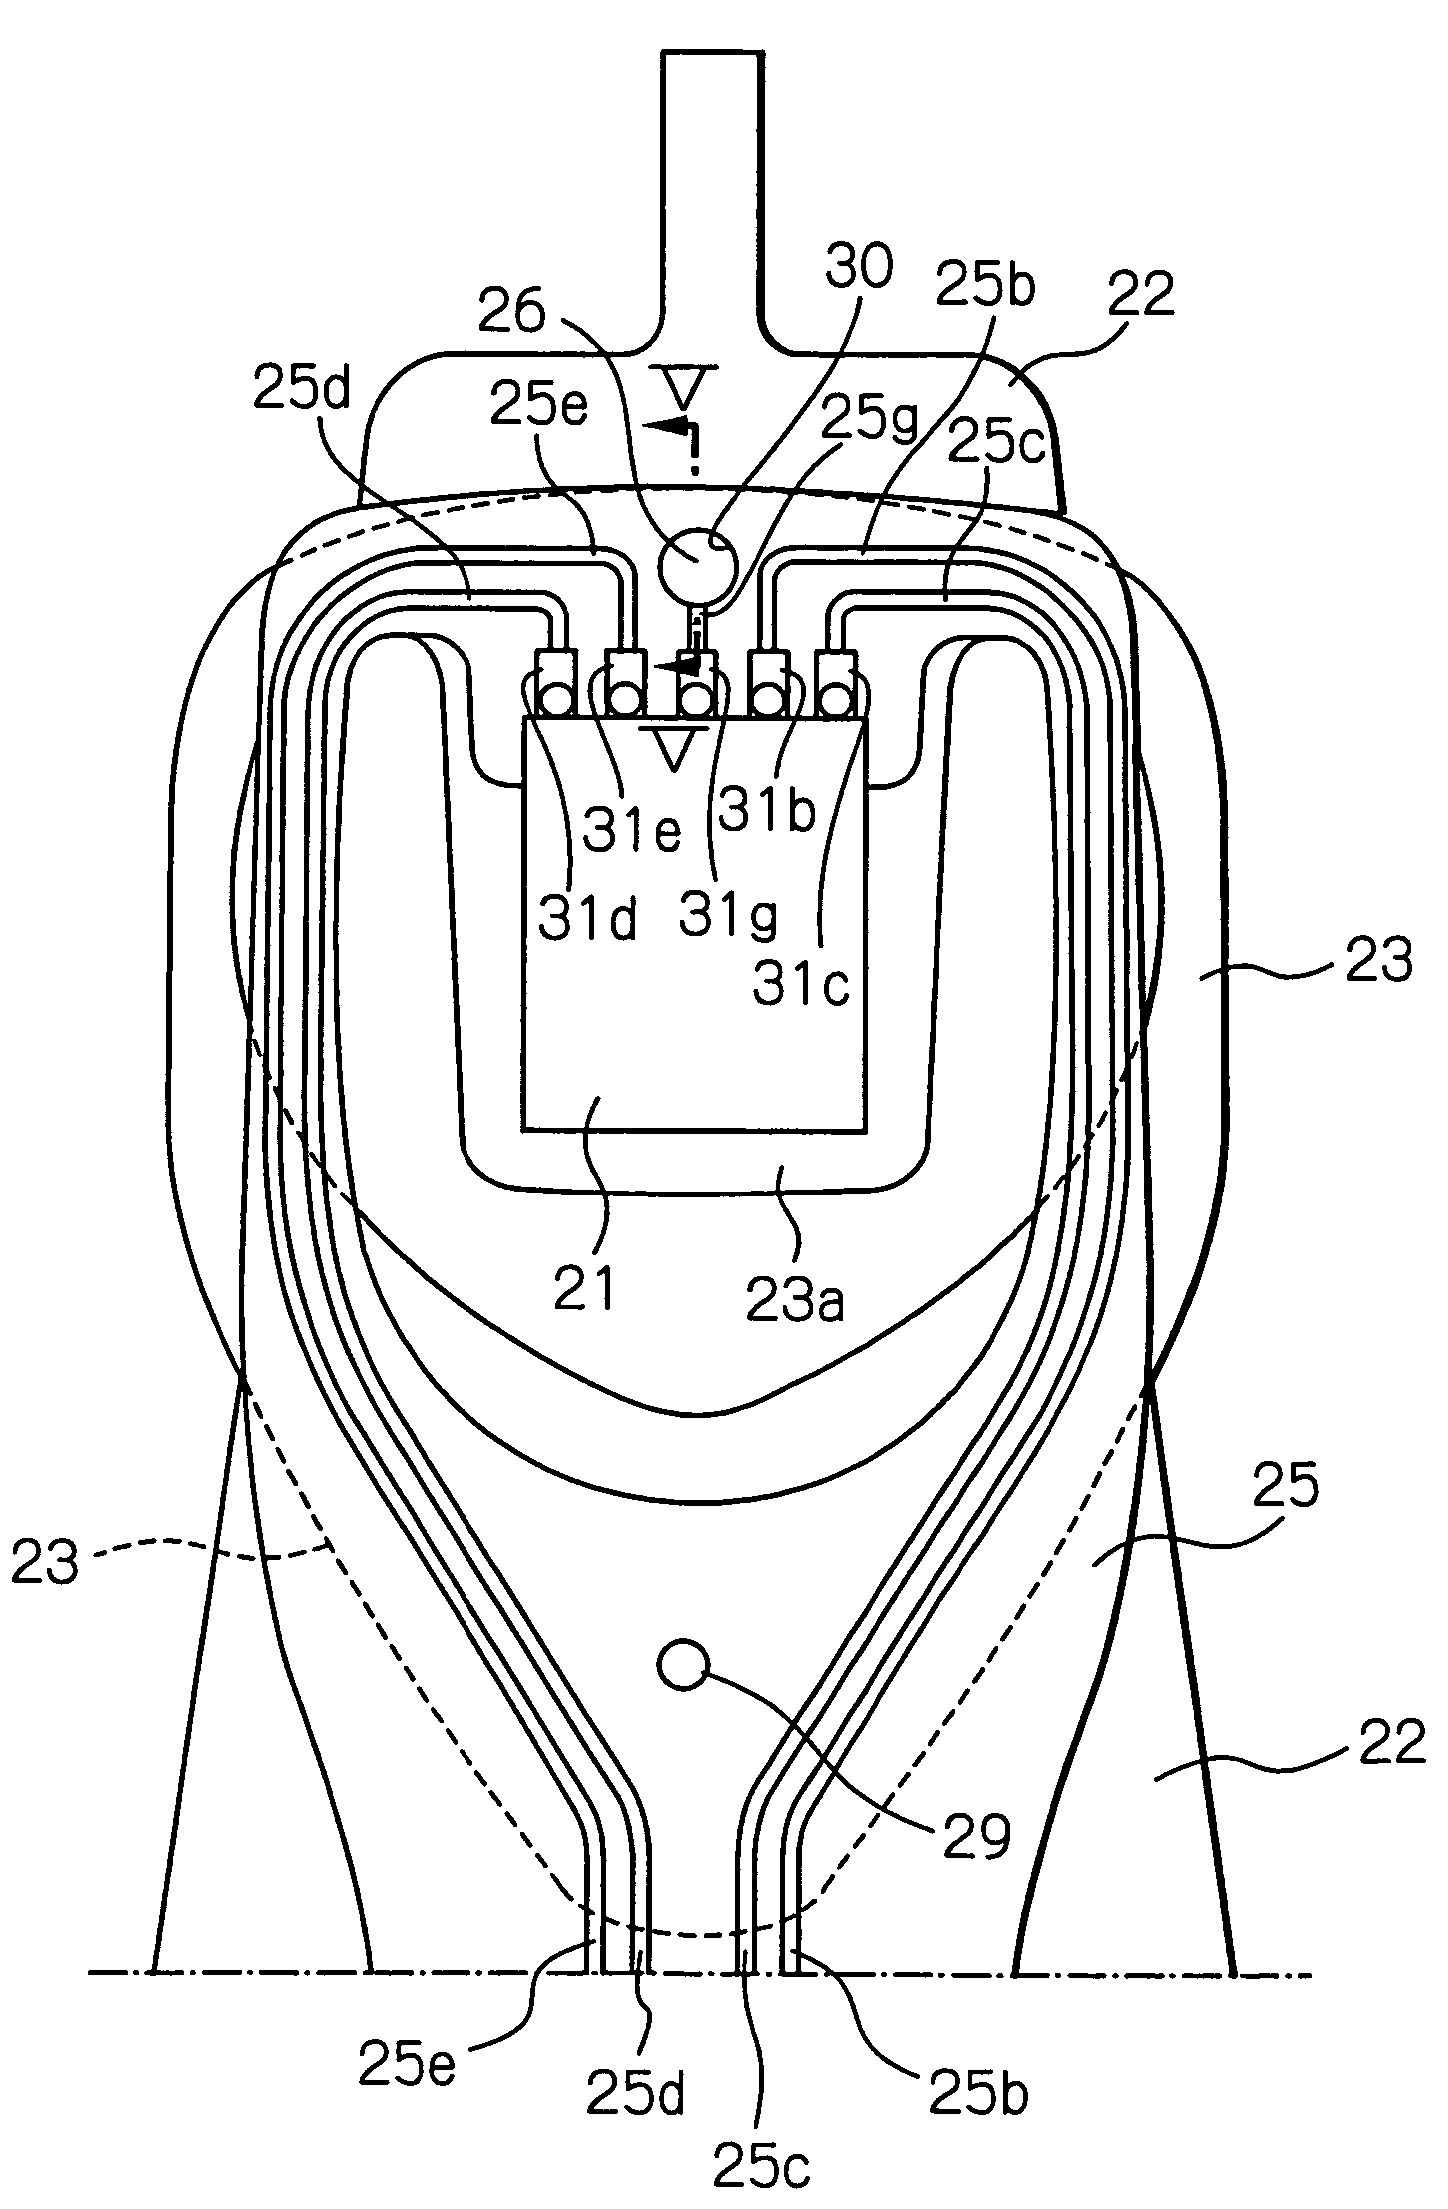 FPC with via holes with filler being welded to suspension and drive apparatus